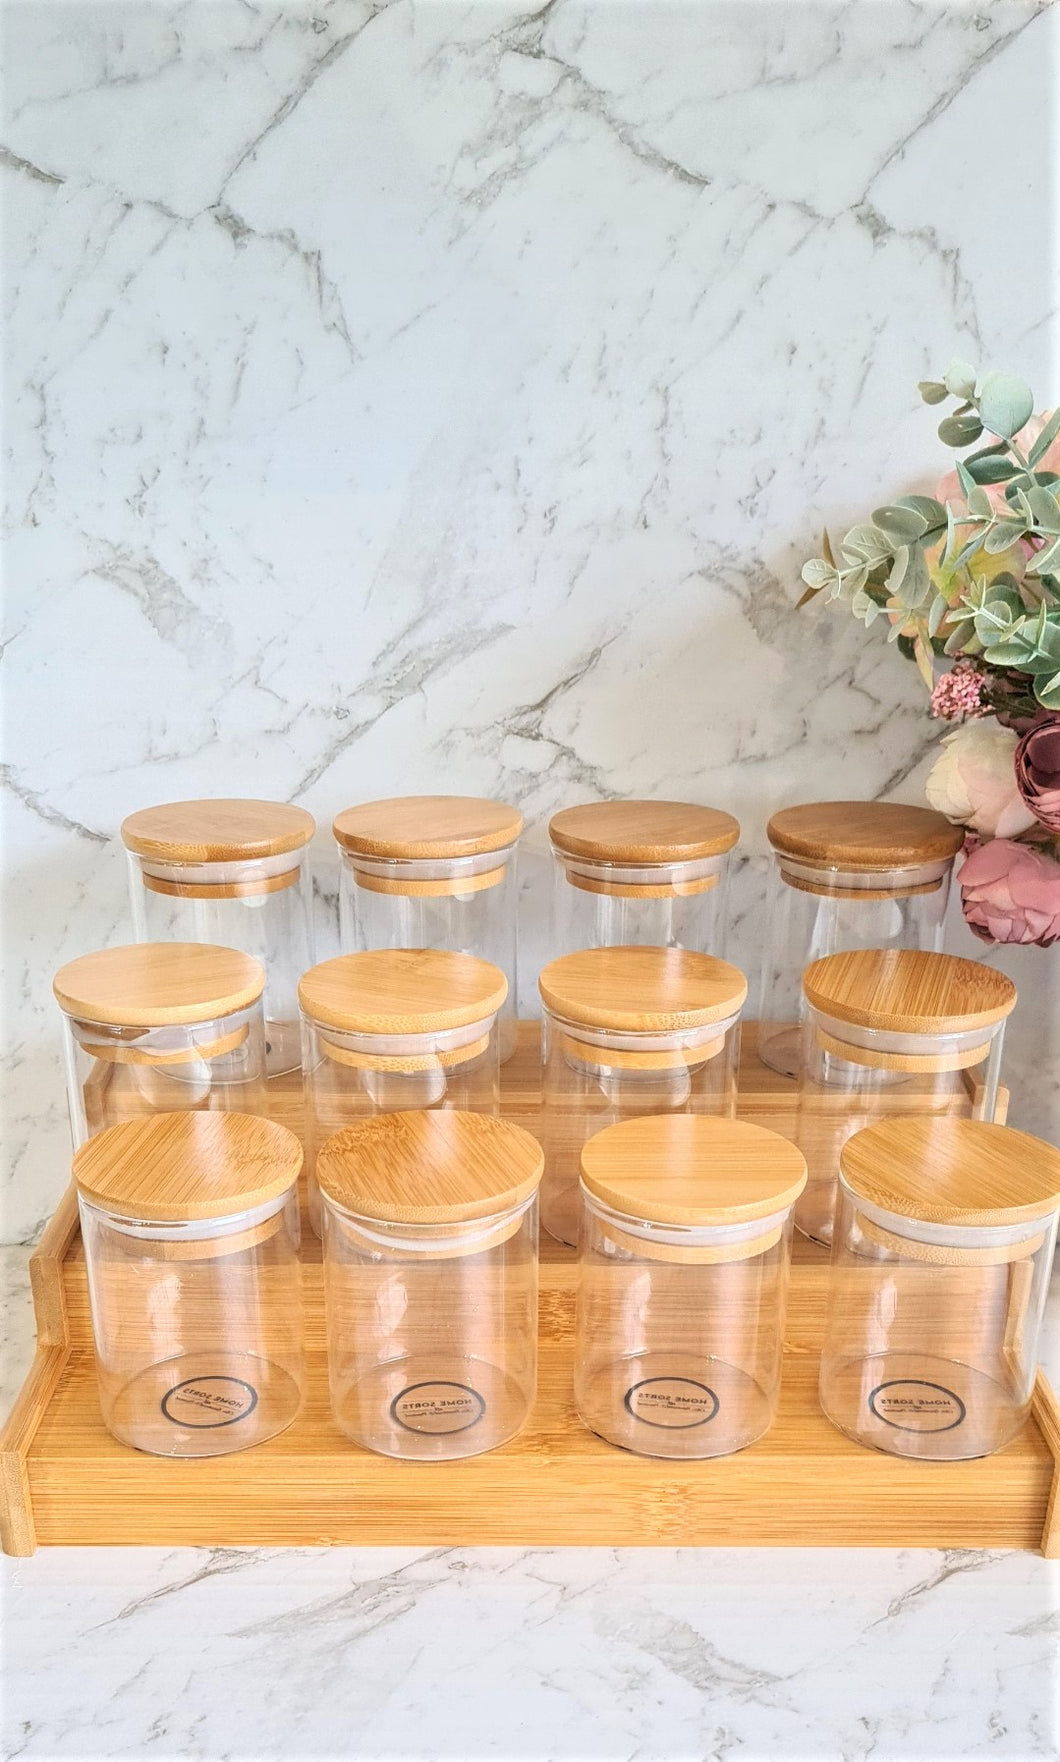 12 Herbs and Spice Jars (200mls)  with Bamboo Shelf